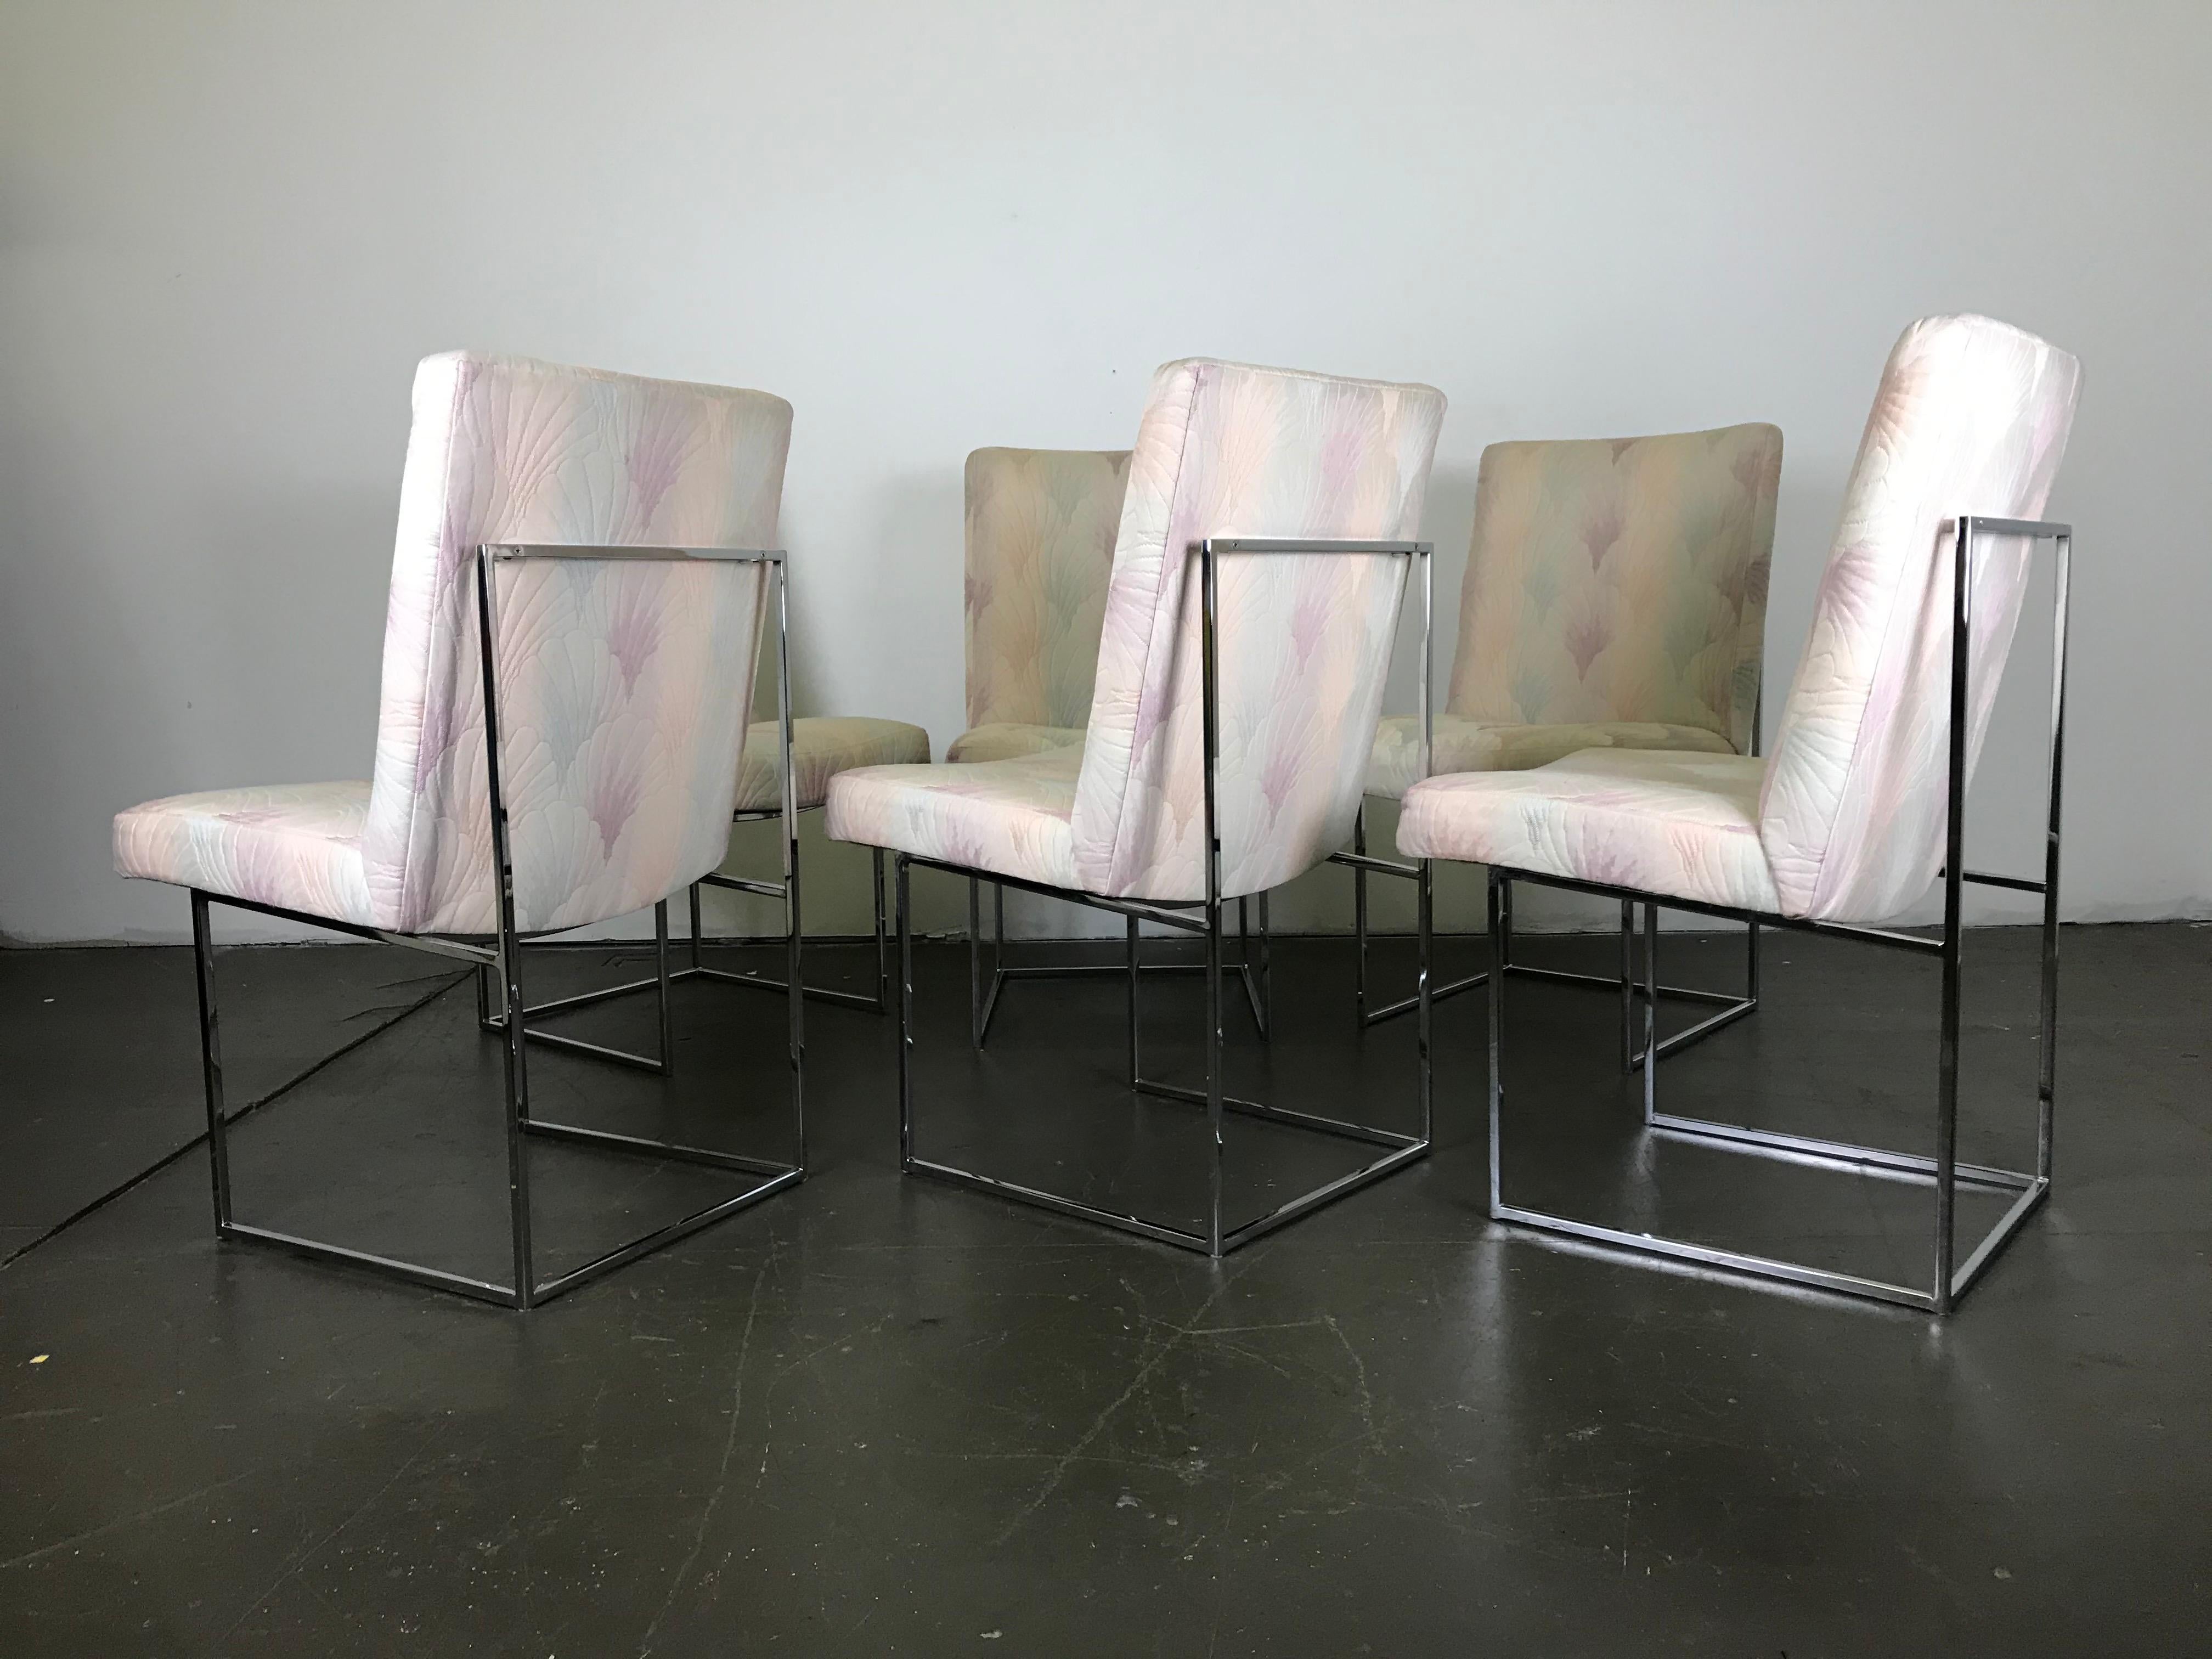 Classic set of six sleek chrome and fabric dining chairs by Milo Baughman for Thayer Coggin. The chrome bases are in excellent condition - polished and hardly any wear at all. The seats need to be reupholstered (unless you're going for The Golden